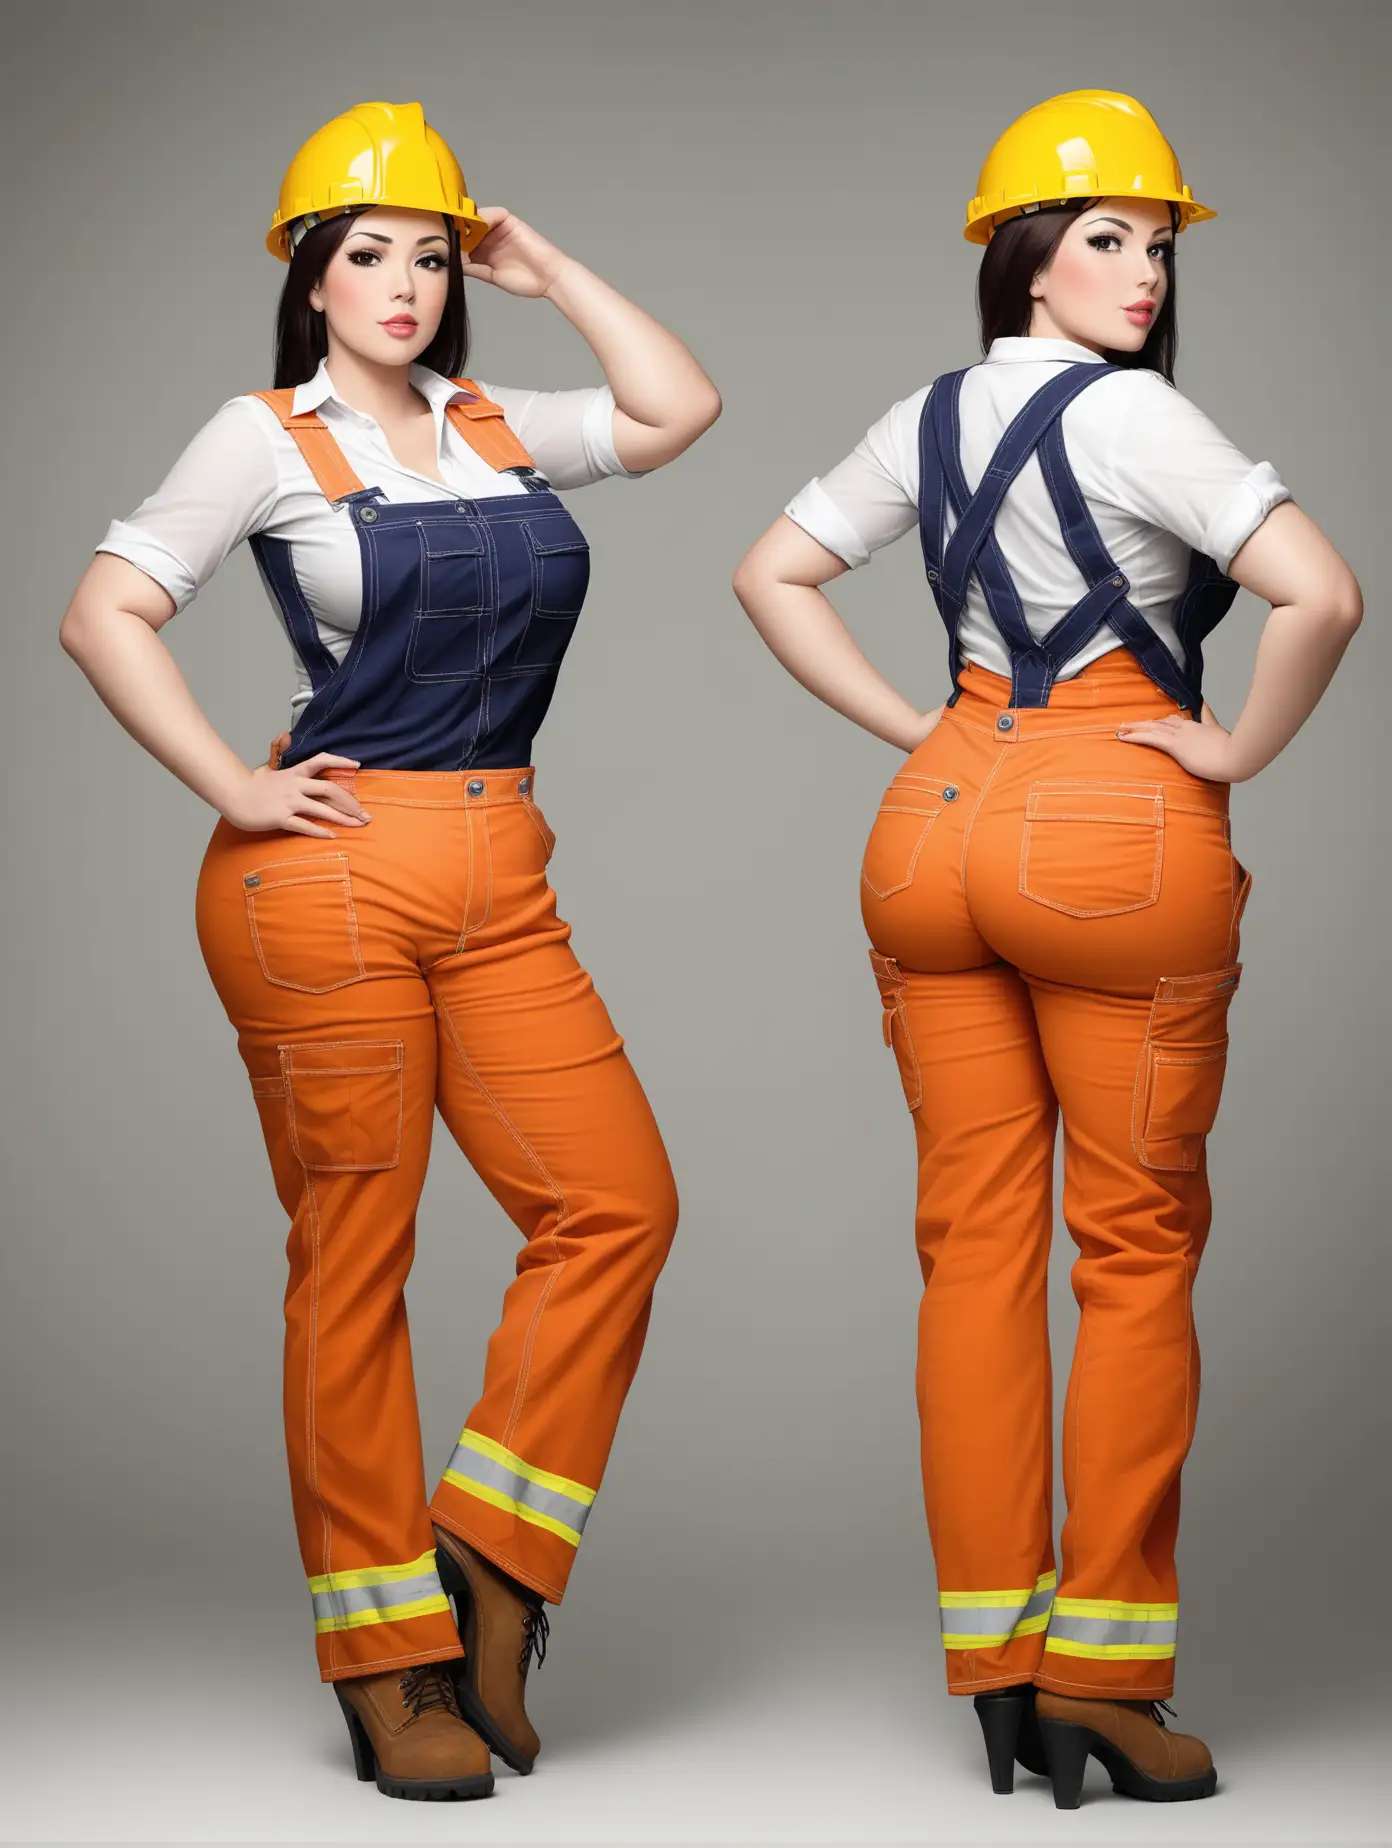 Sensual picture of a attractive woman, age 30, construction worker outfit, large butt, 2 poses, full body